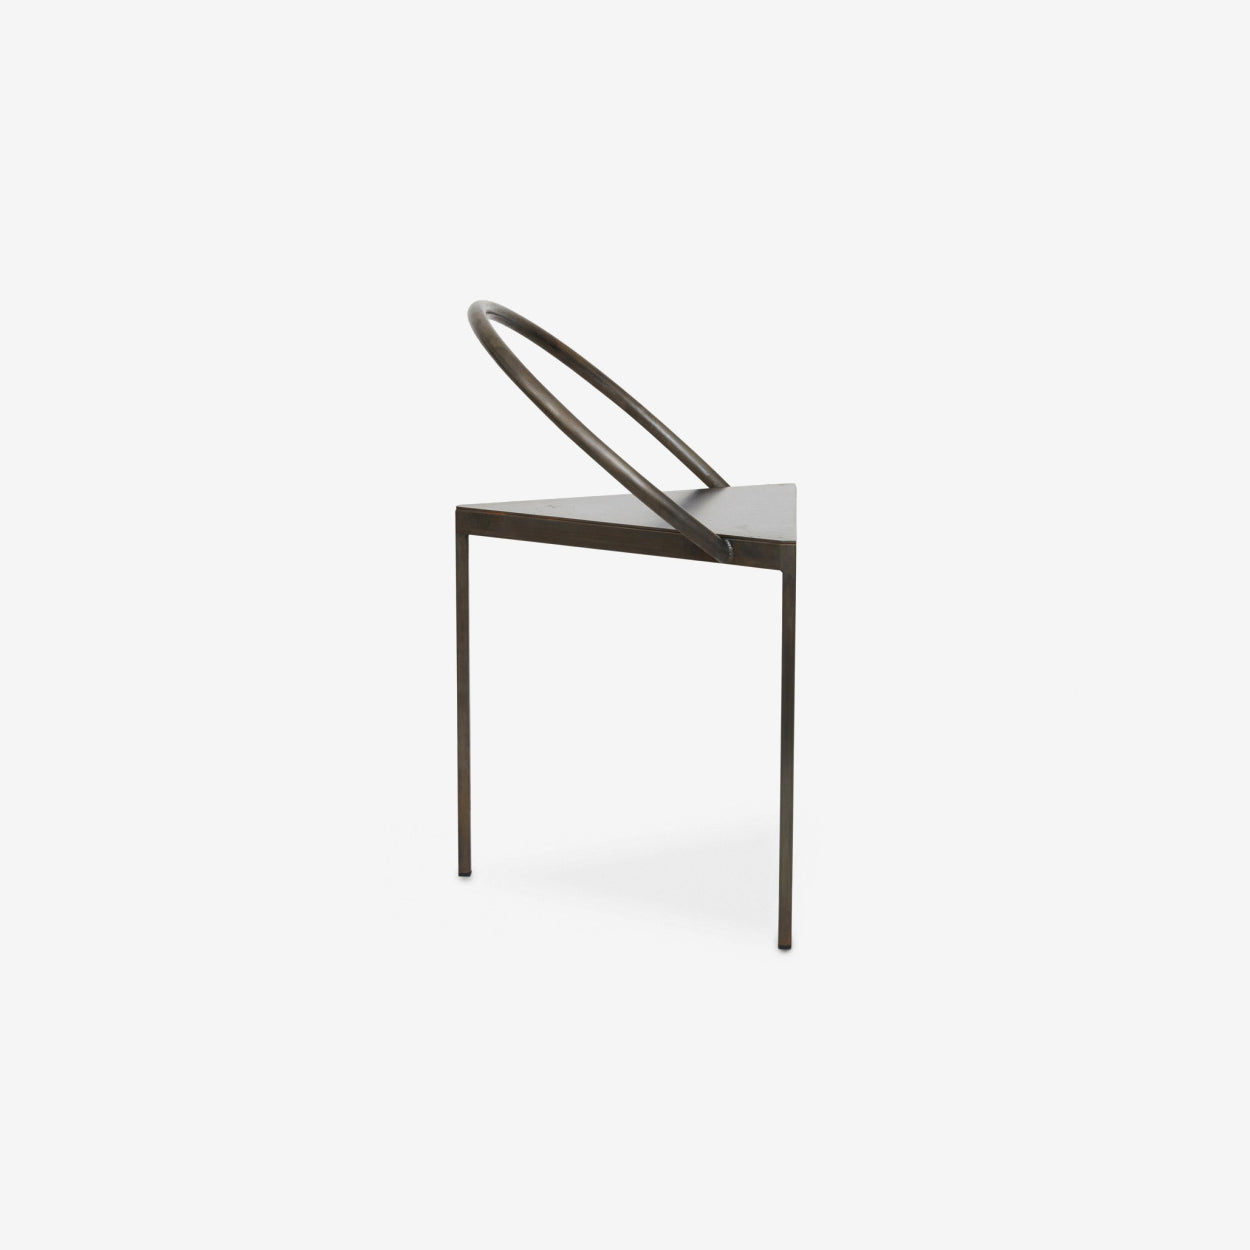 FRAMA Stainless Steel Triangolo Chair